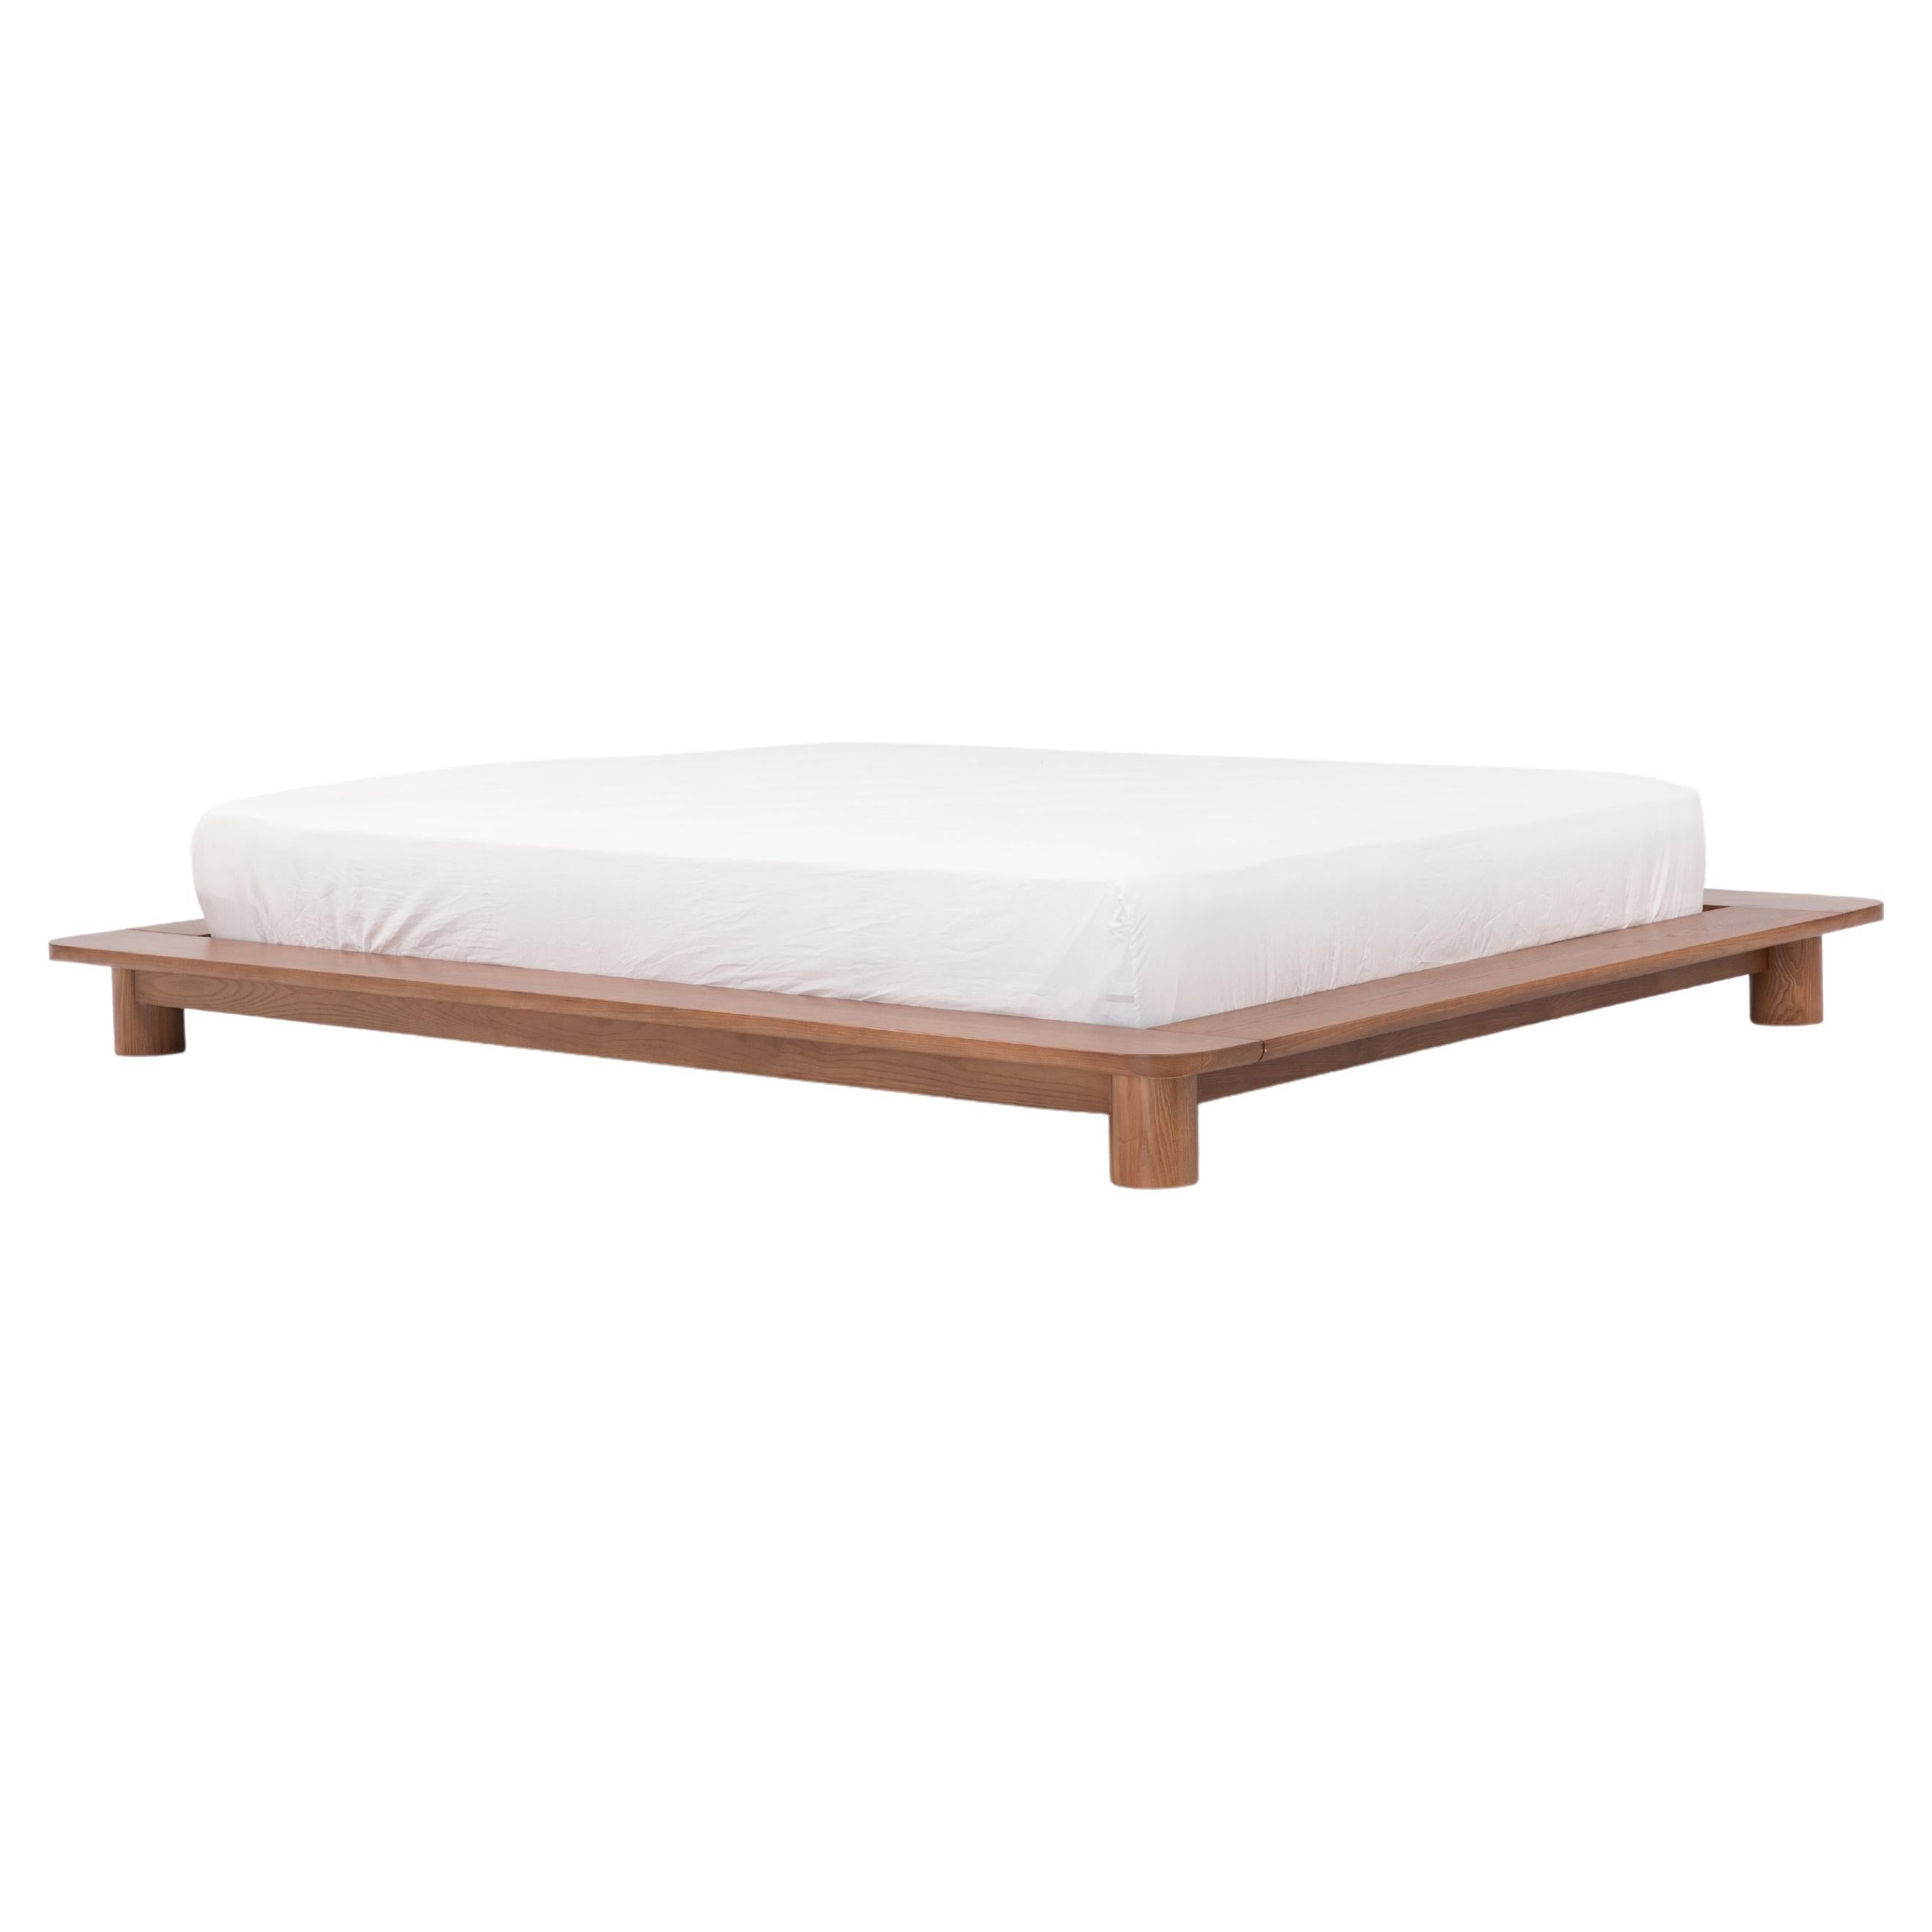 Kiral Platform Bed by Sun at Six, Minimalist Sienna Queen Bed in Wood For Sale